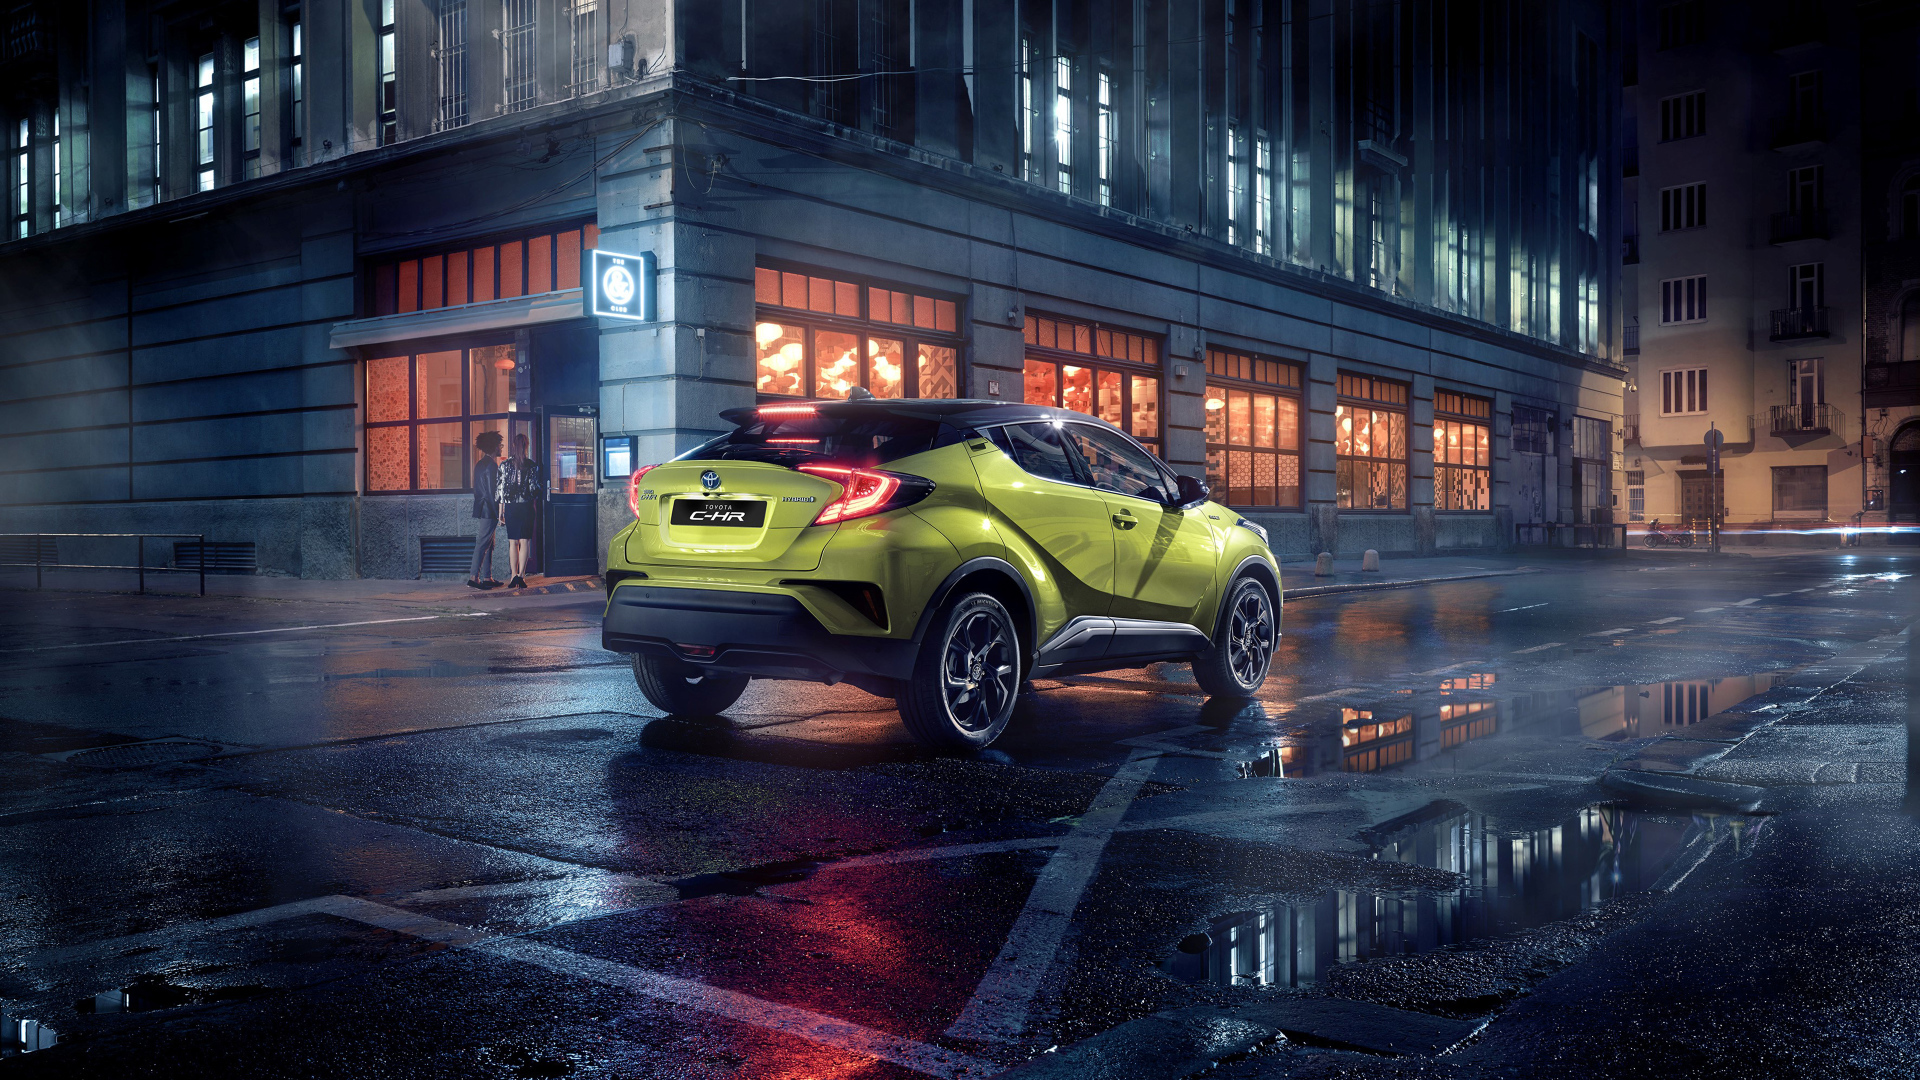 Toyota C-HR 2019 SUV on the street after the rain